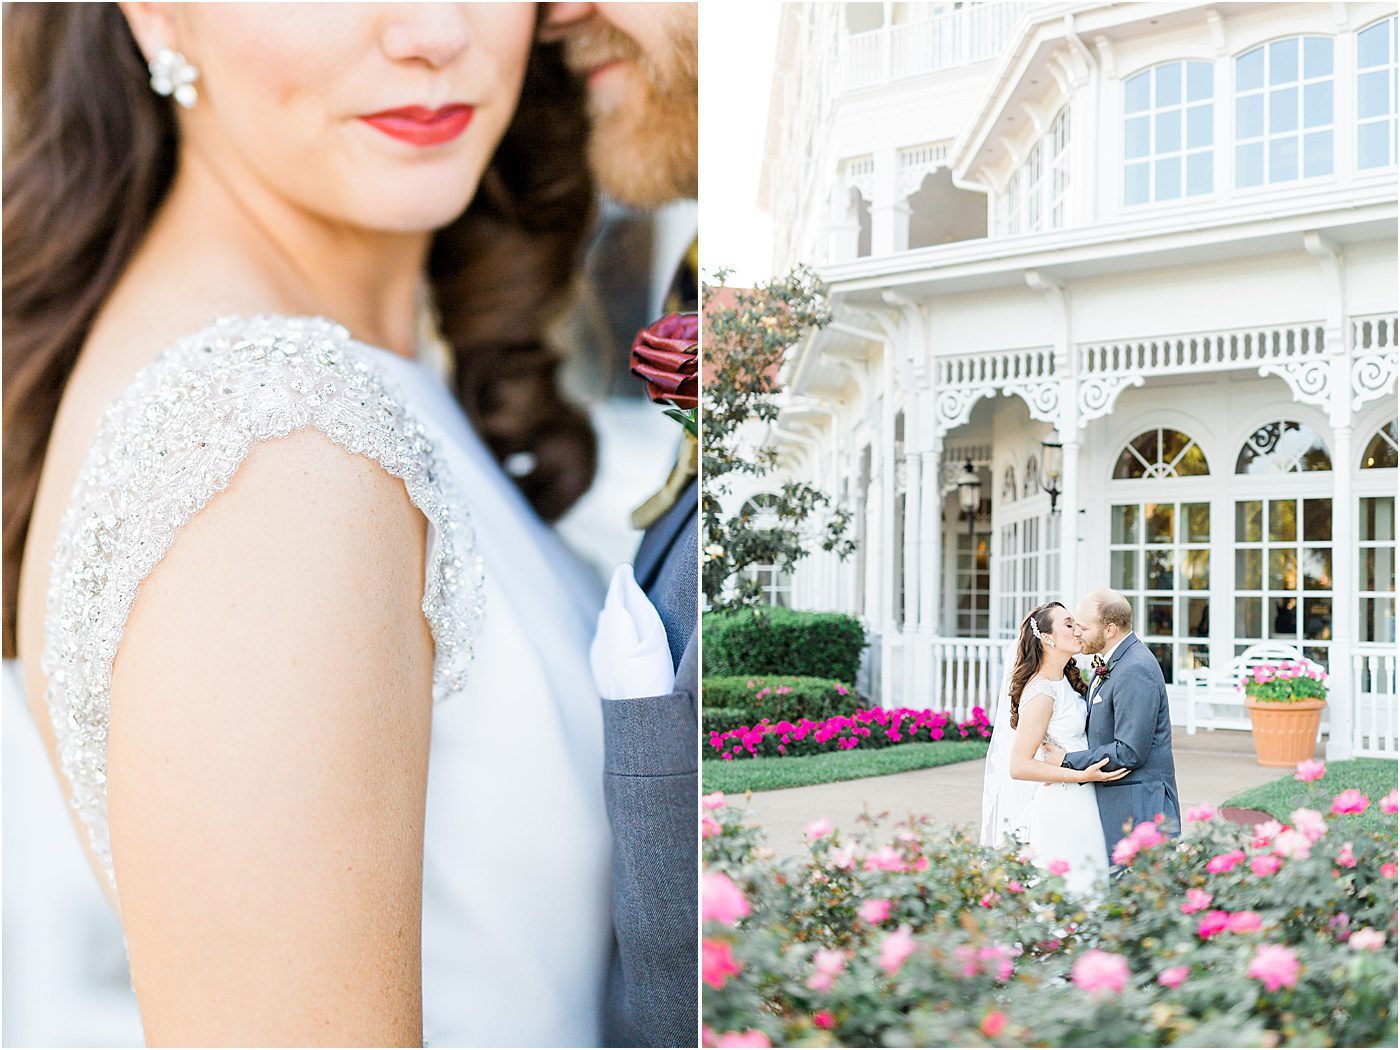 Disney World Wedding at Grand Floridian with Beauty and the Beast Theme | Charleston Wedding Photographer | Catherine Ann Photography